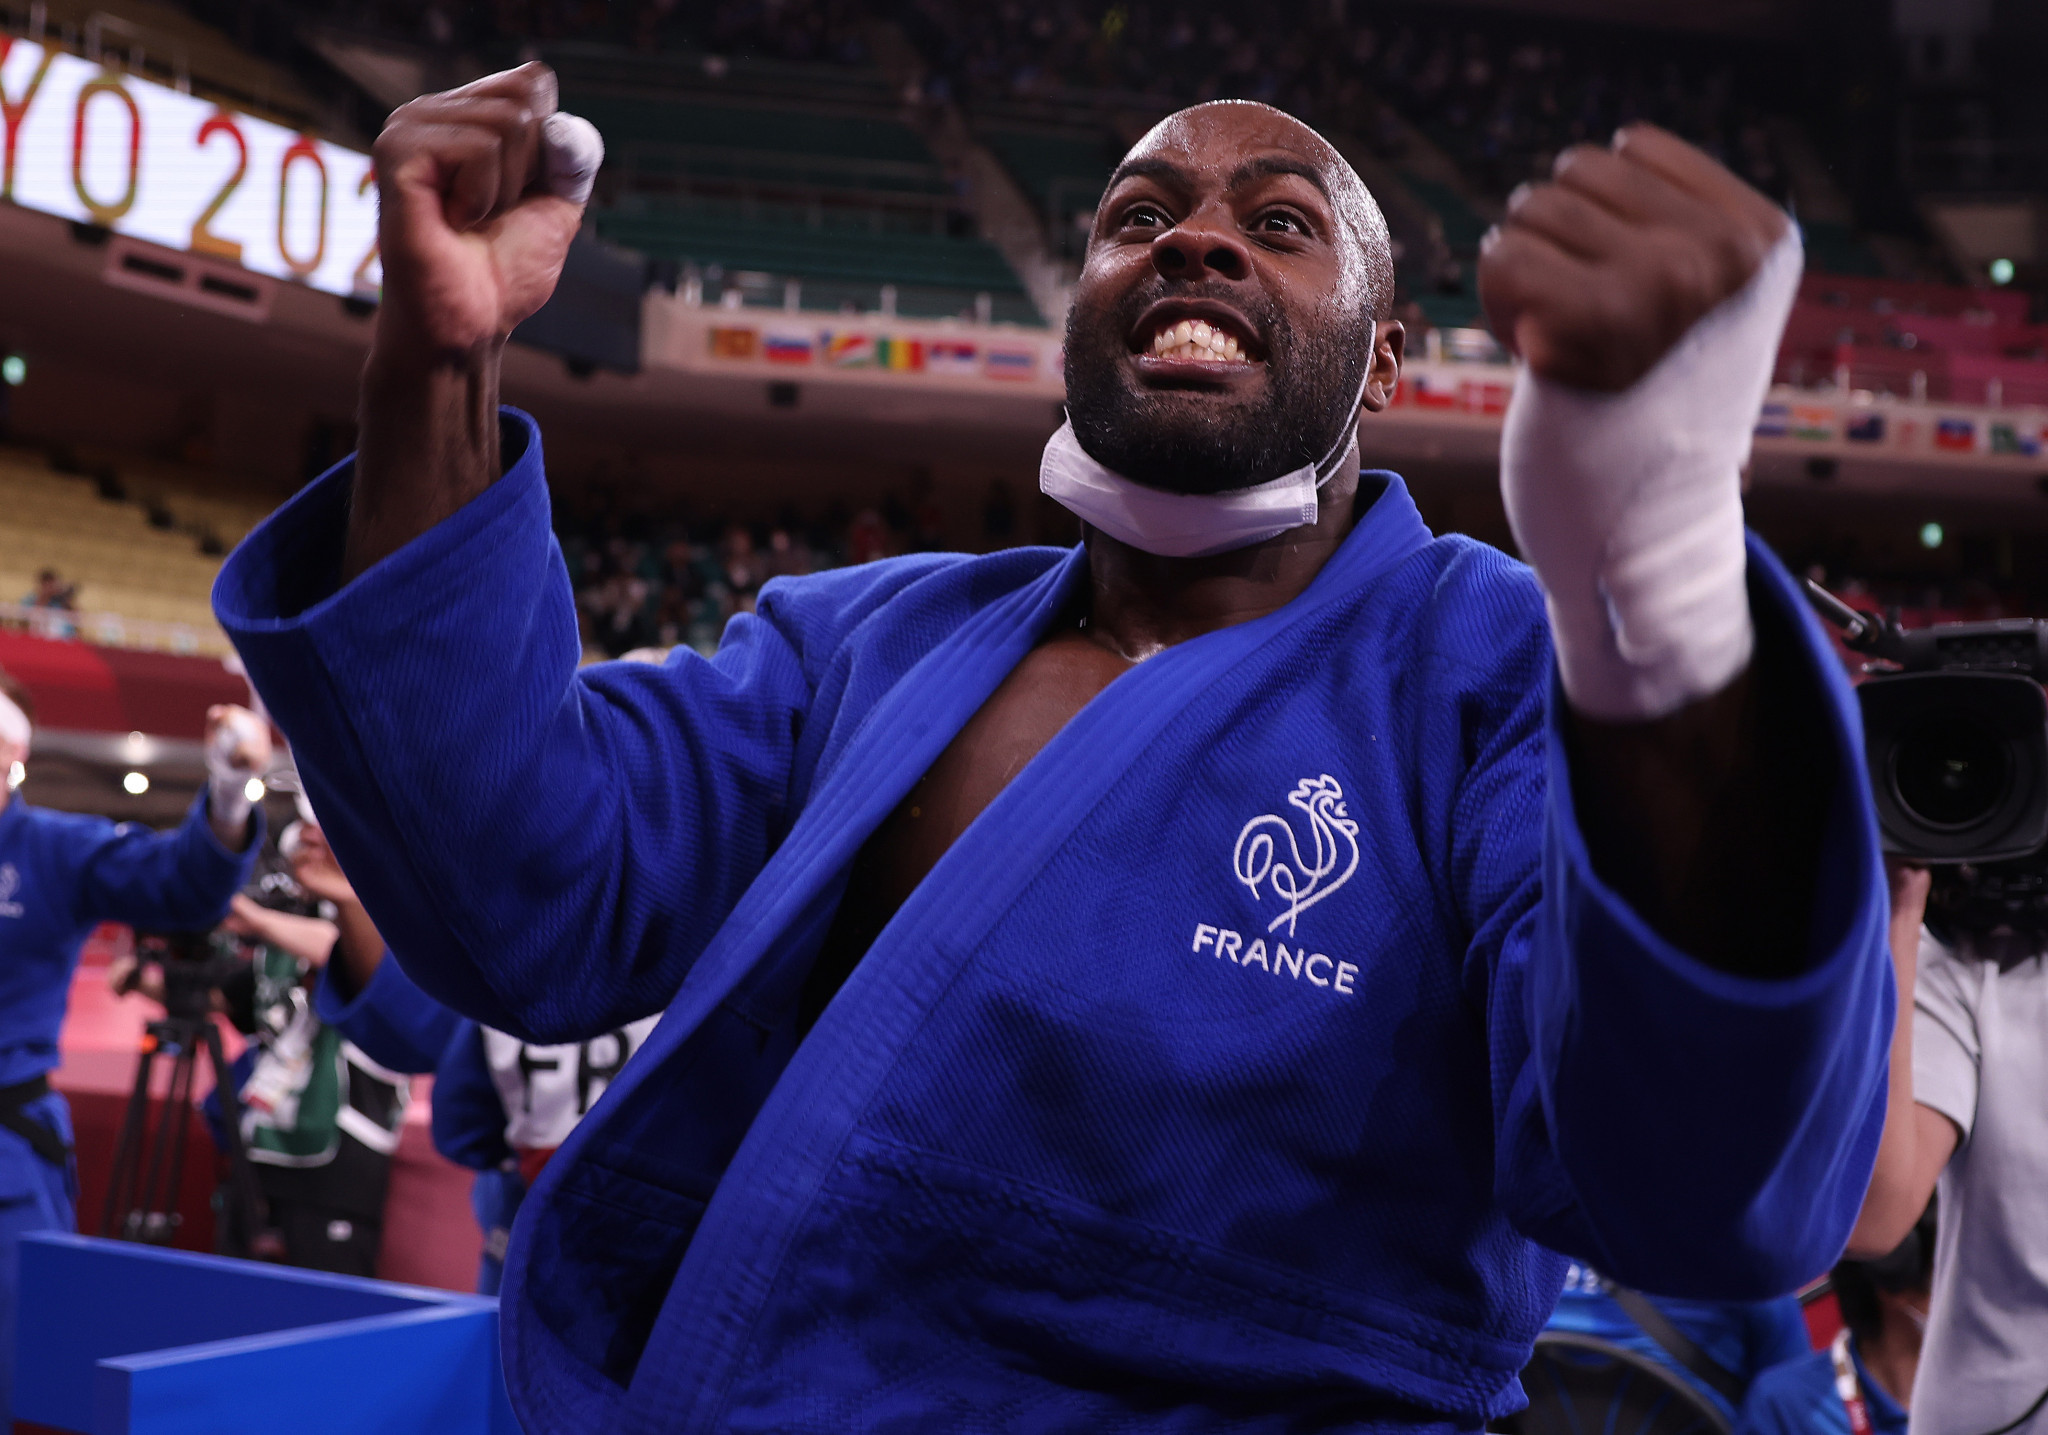 France's Teddy Riner has won five medals in judo across four Olympic Games ©Getty Images